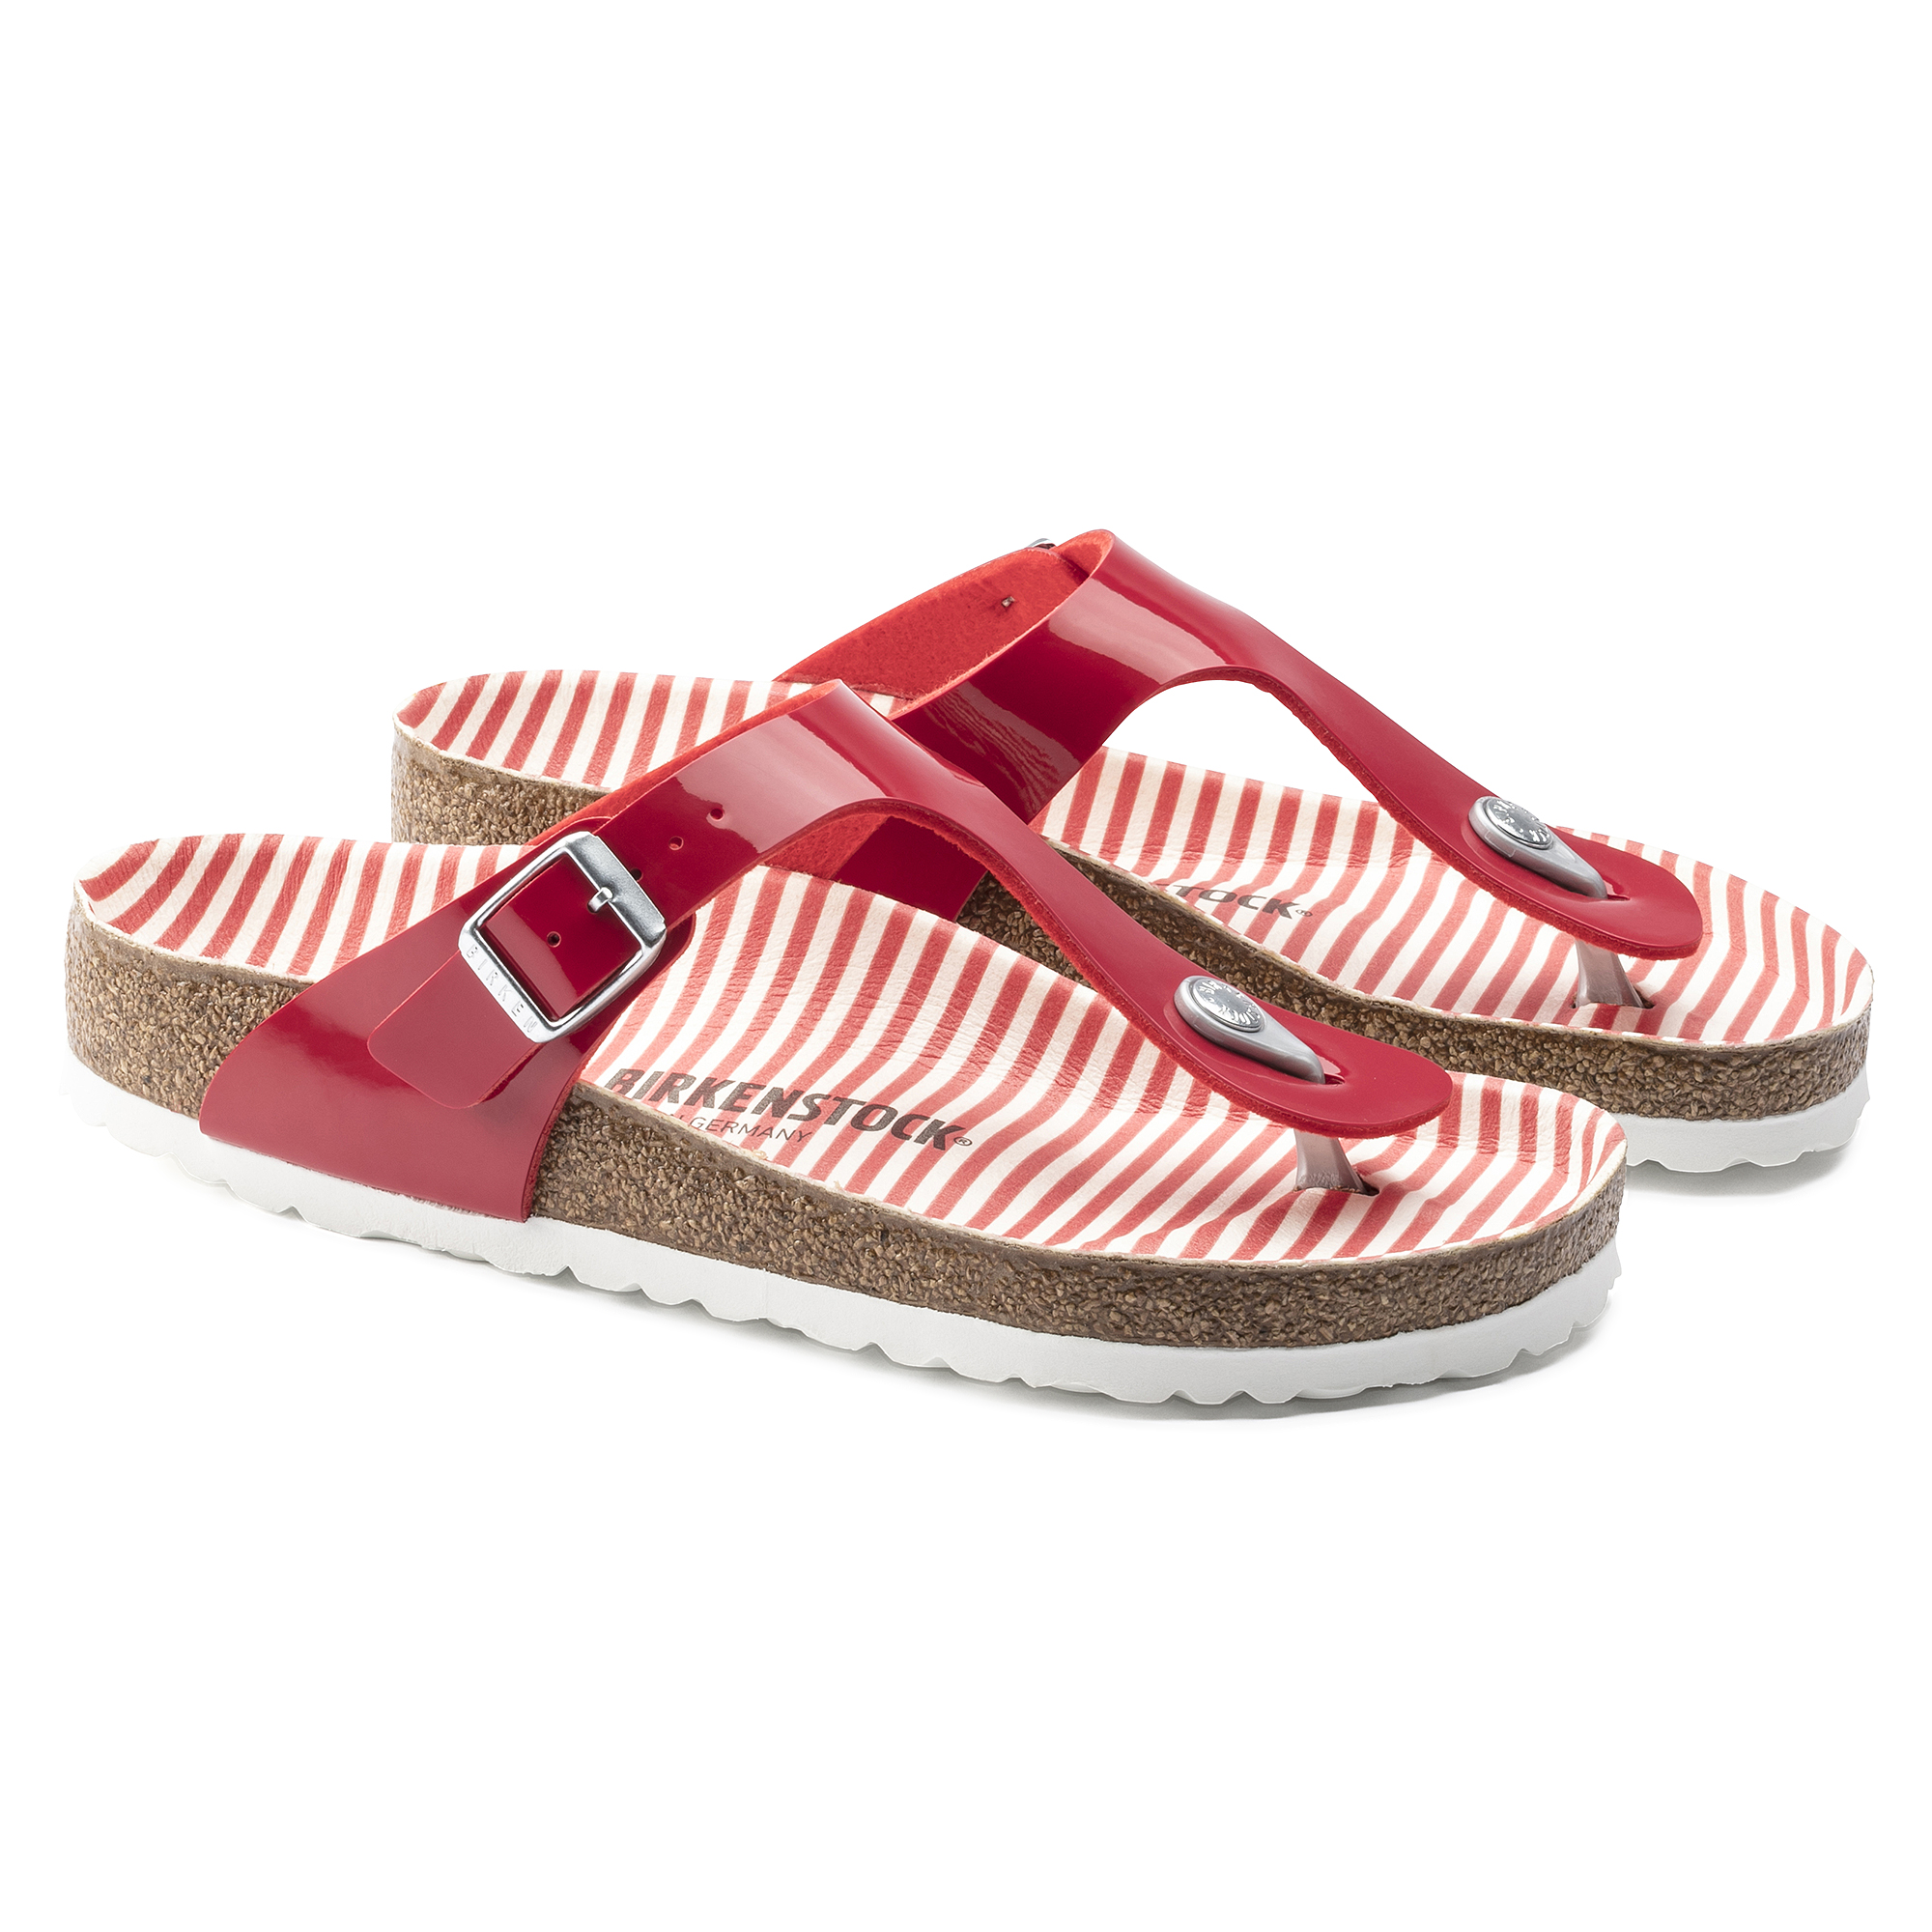 birkenstock gizeh red patent leather